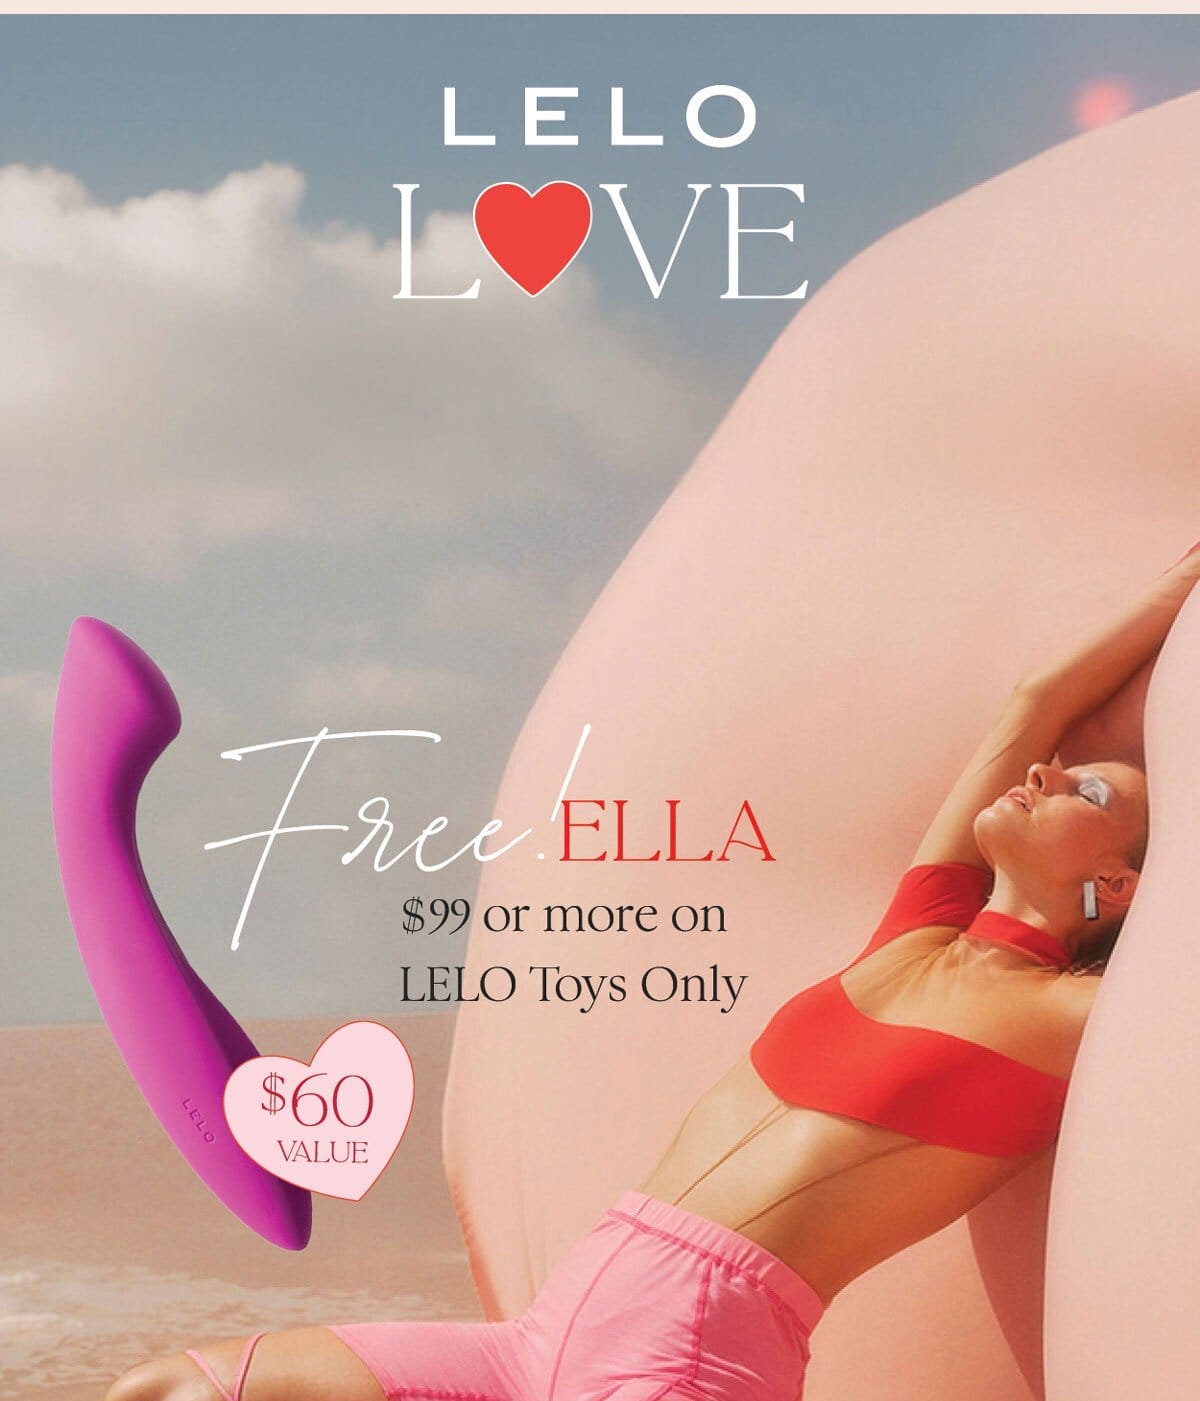 Free Ella with \\$99 or more on LELO toys only